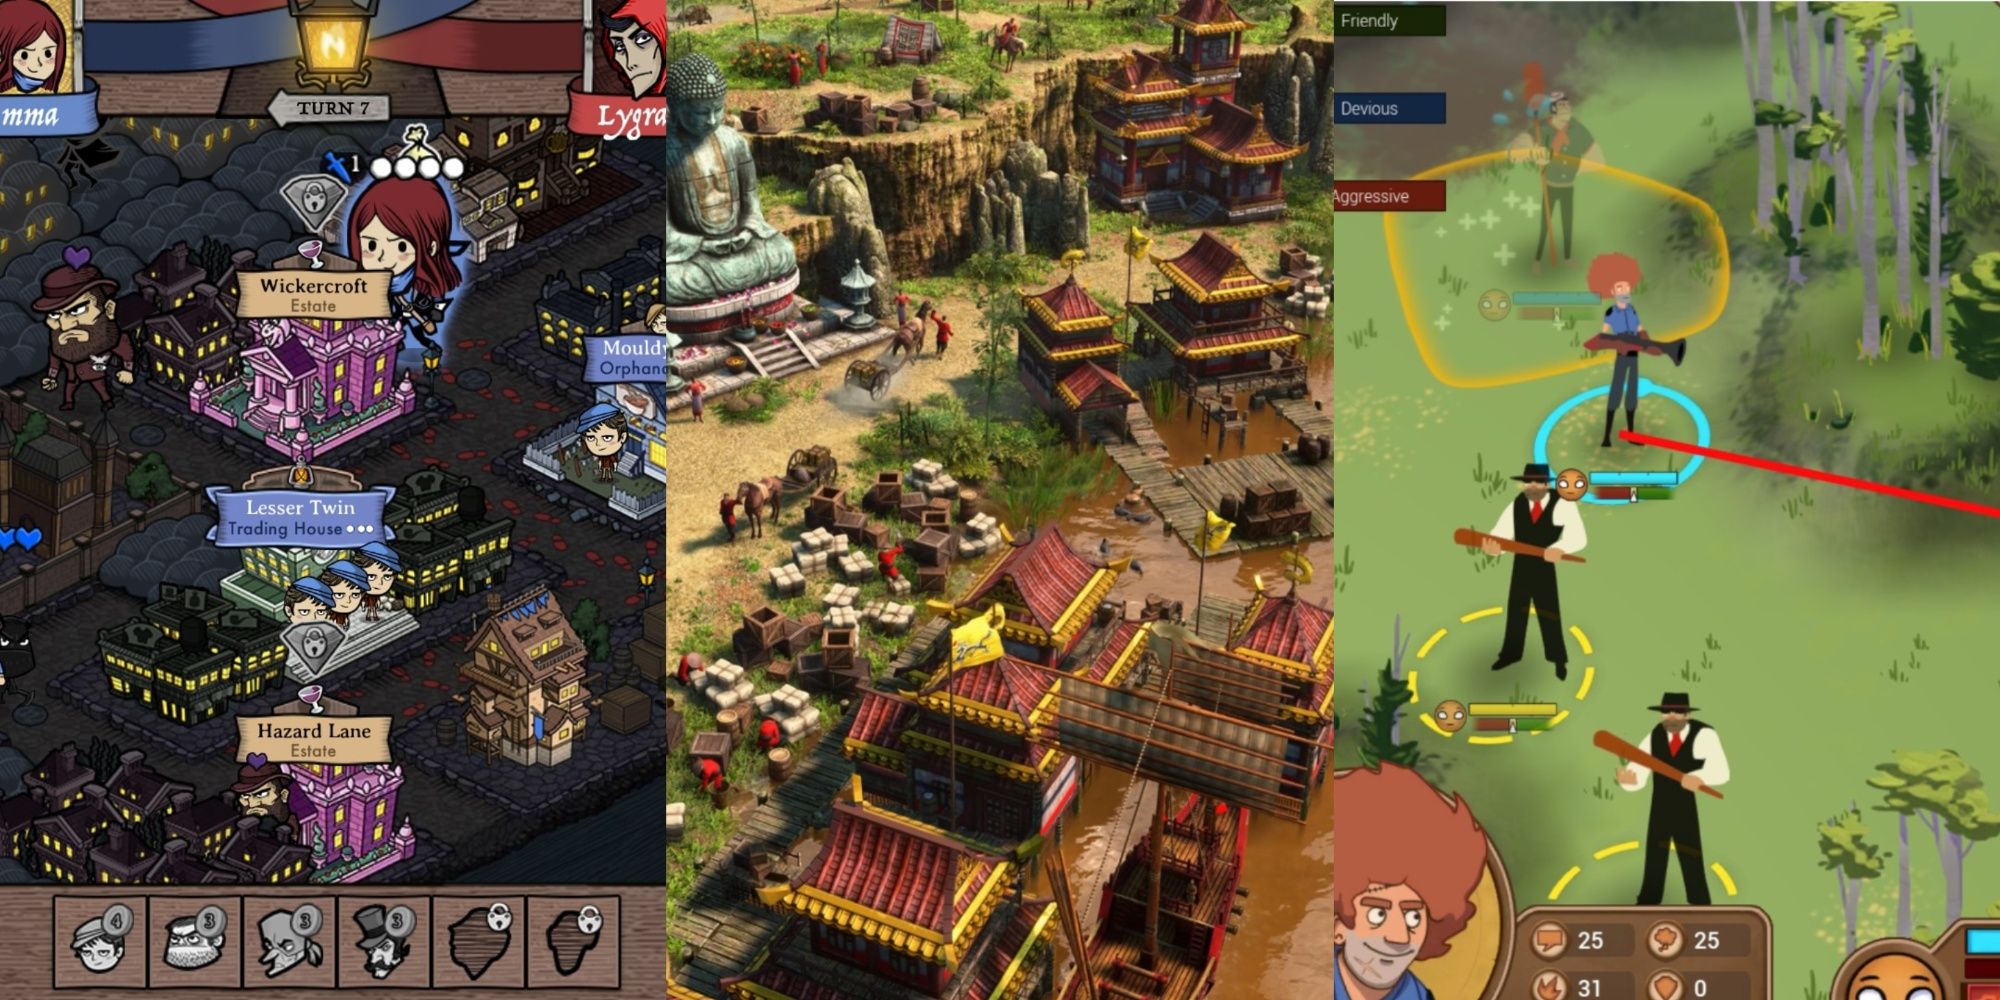 A trisplit of the city from Antihero, a city from Age Of Empires 3 and some characters from Renowned Explorers: International Society